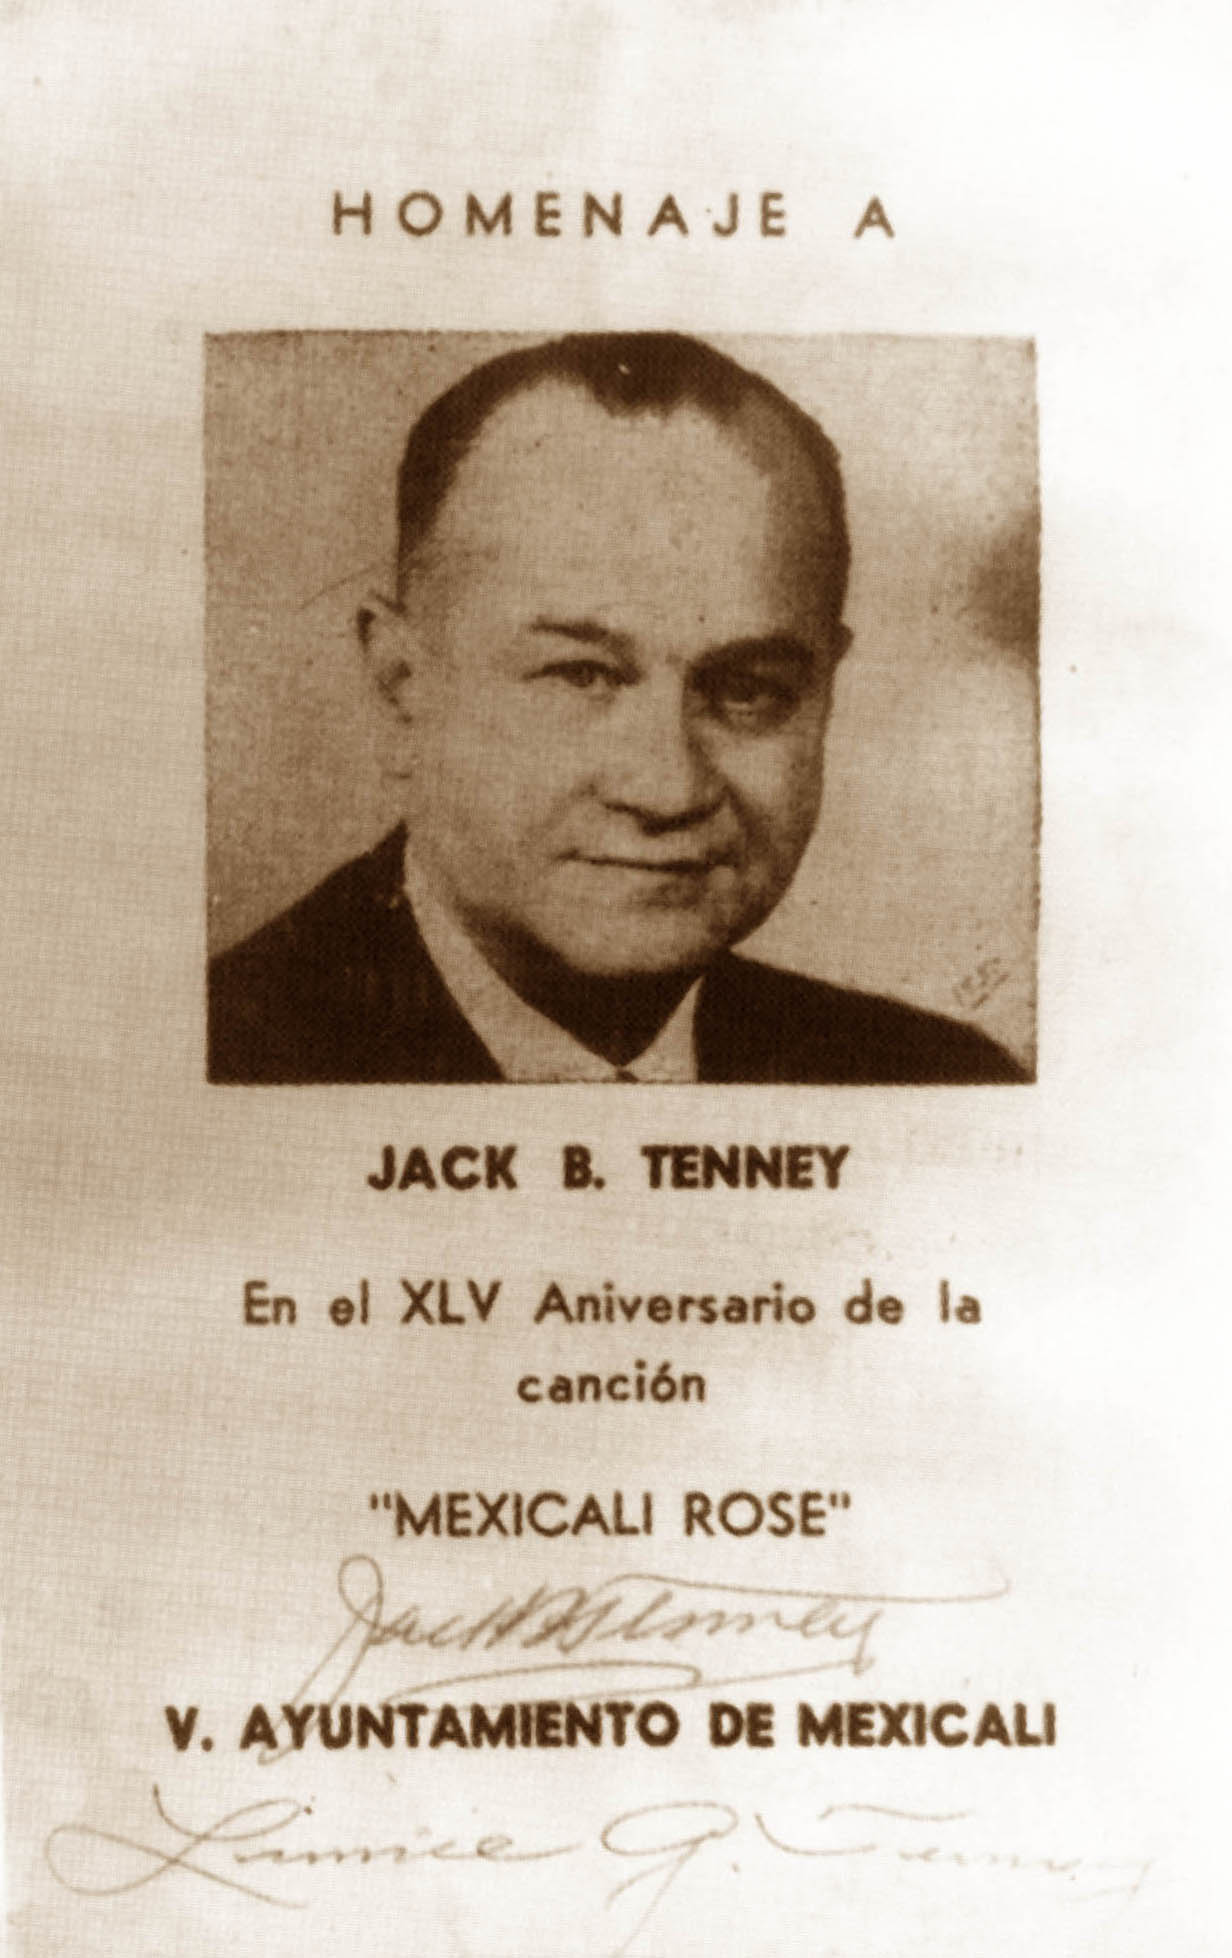 Jack B. Tenney - PIMSA Industrial Parks in Mexico 2